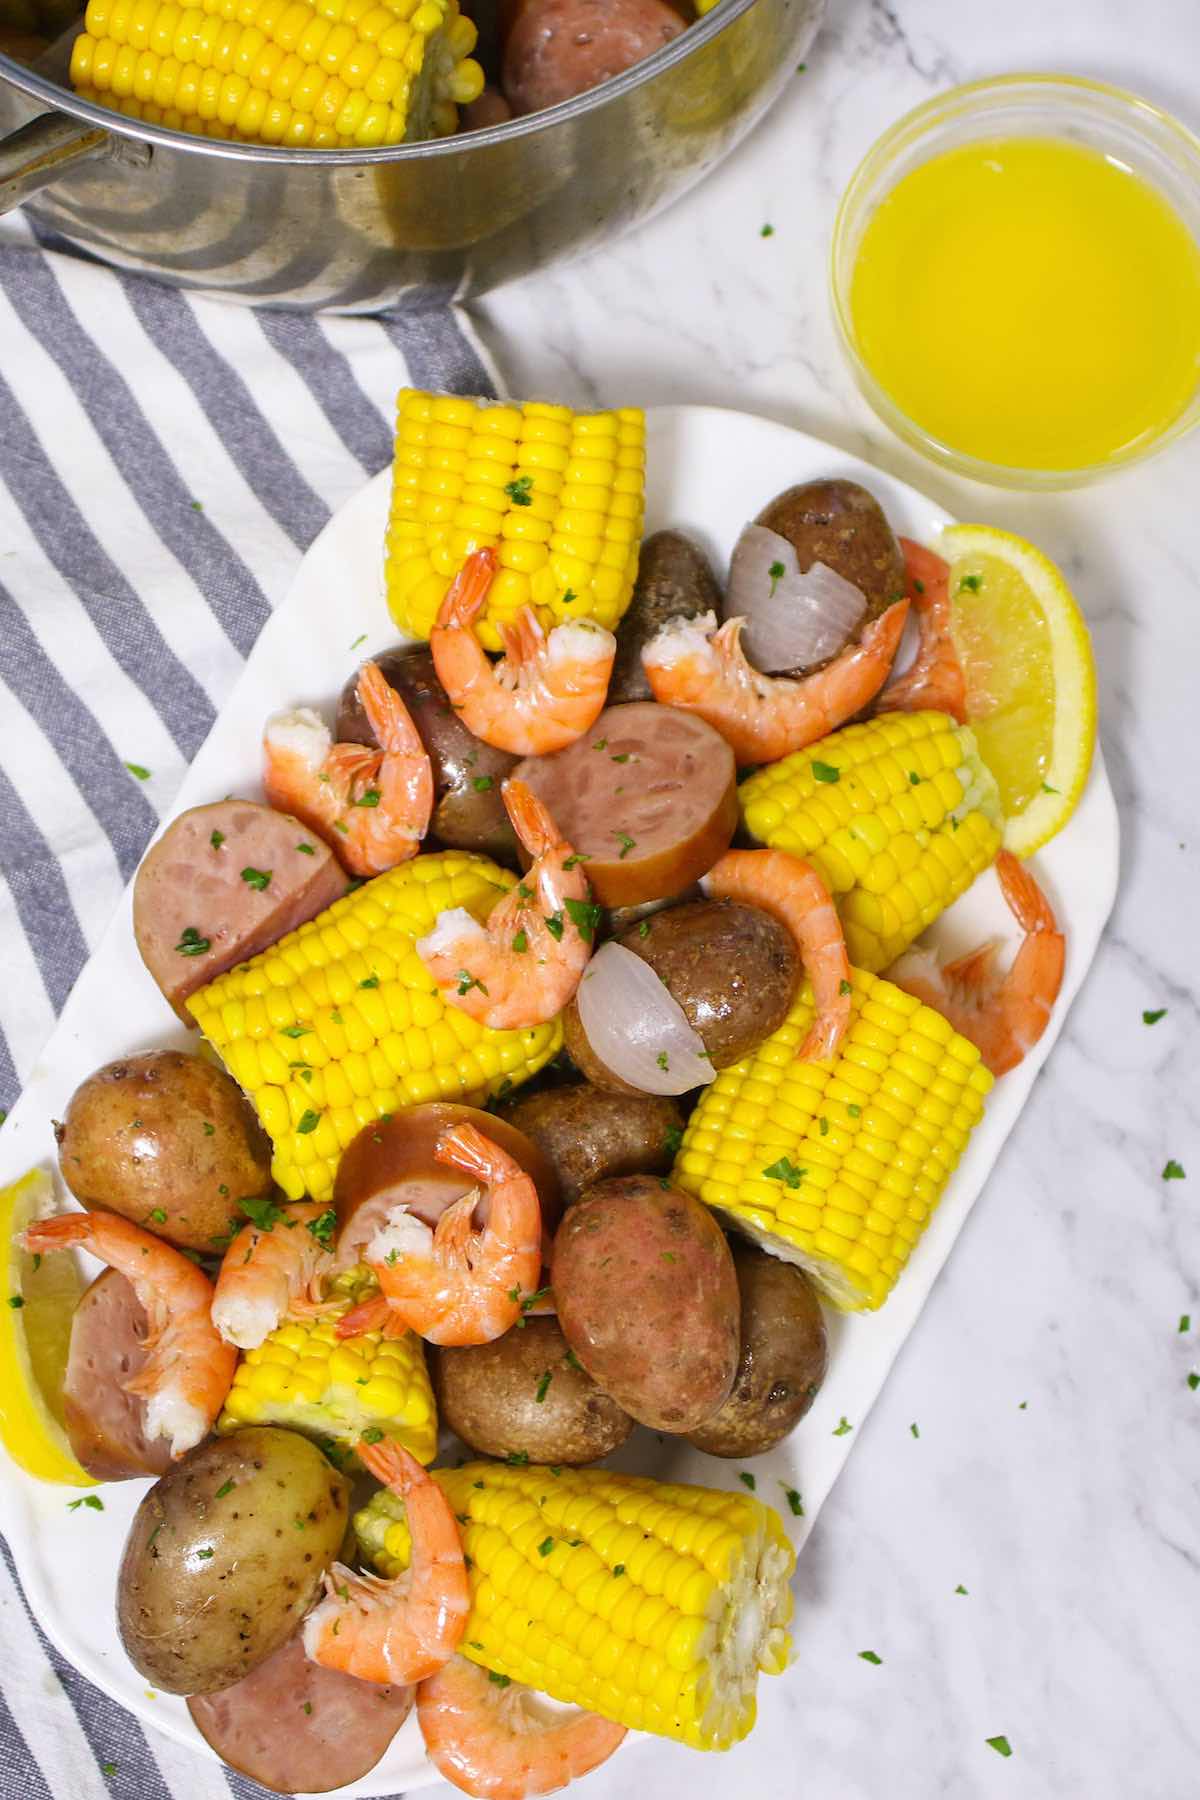 Low Country Boil is a Southern favorite that’s a great crowd pleaser! Tender shrimp are boiled with hearty potatoes, smoked sausage, sweet corn, and the delicious old bay seasoning. This easy one-pot meal is perfect for a party as well as a casual weeknight dinner! #LowCountryBoil #FrogmoreStew